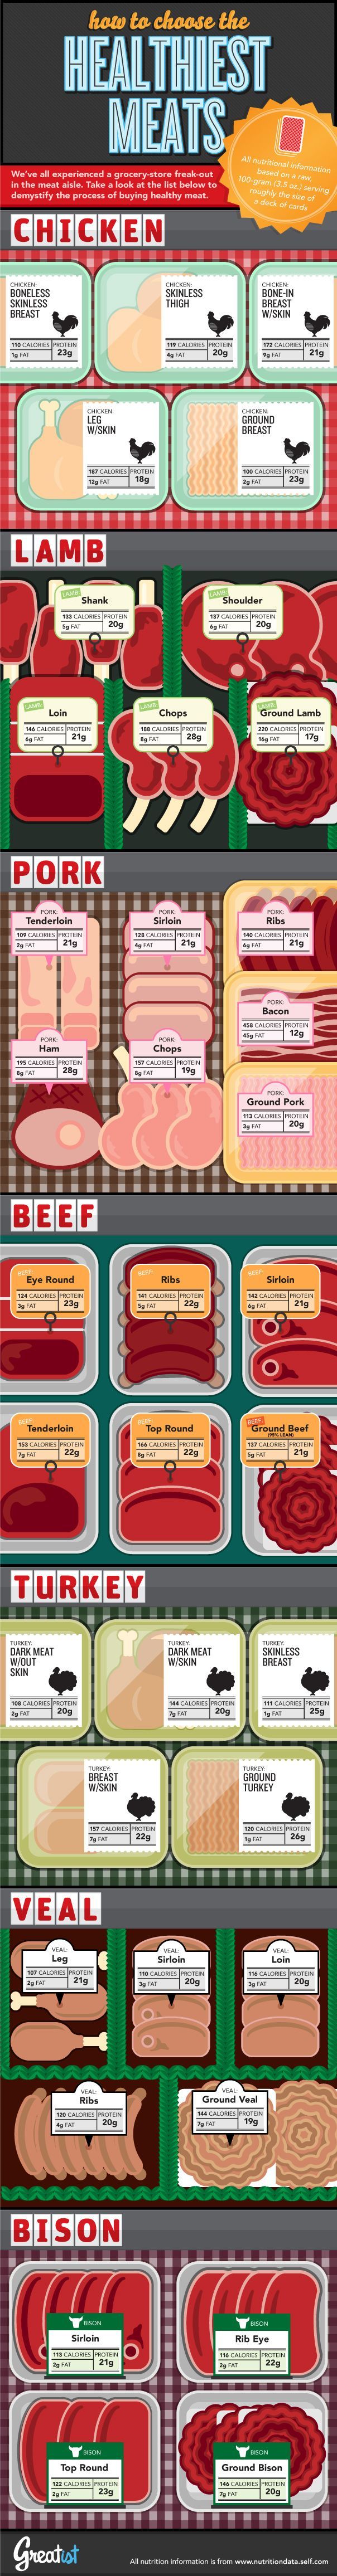 How to Choose the Healthiest Meats